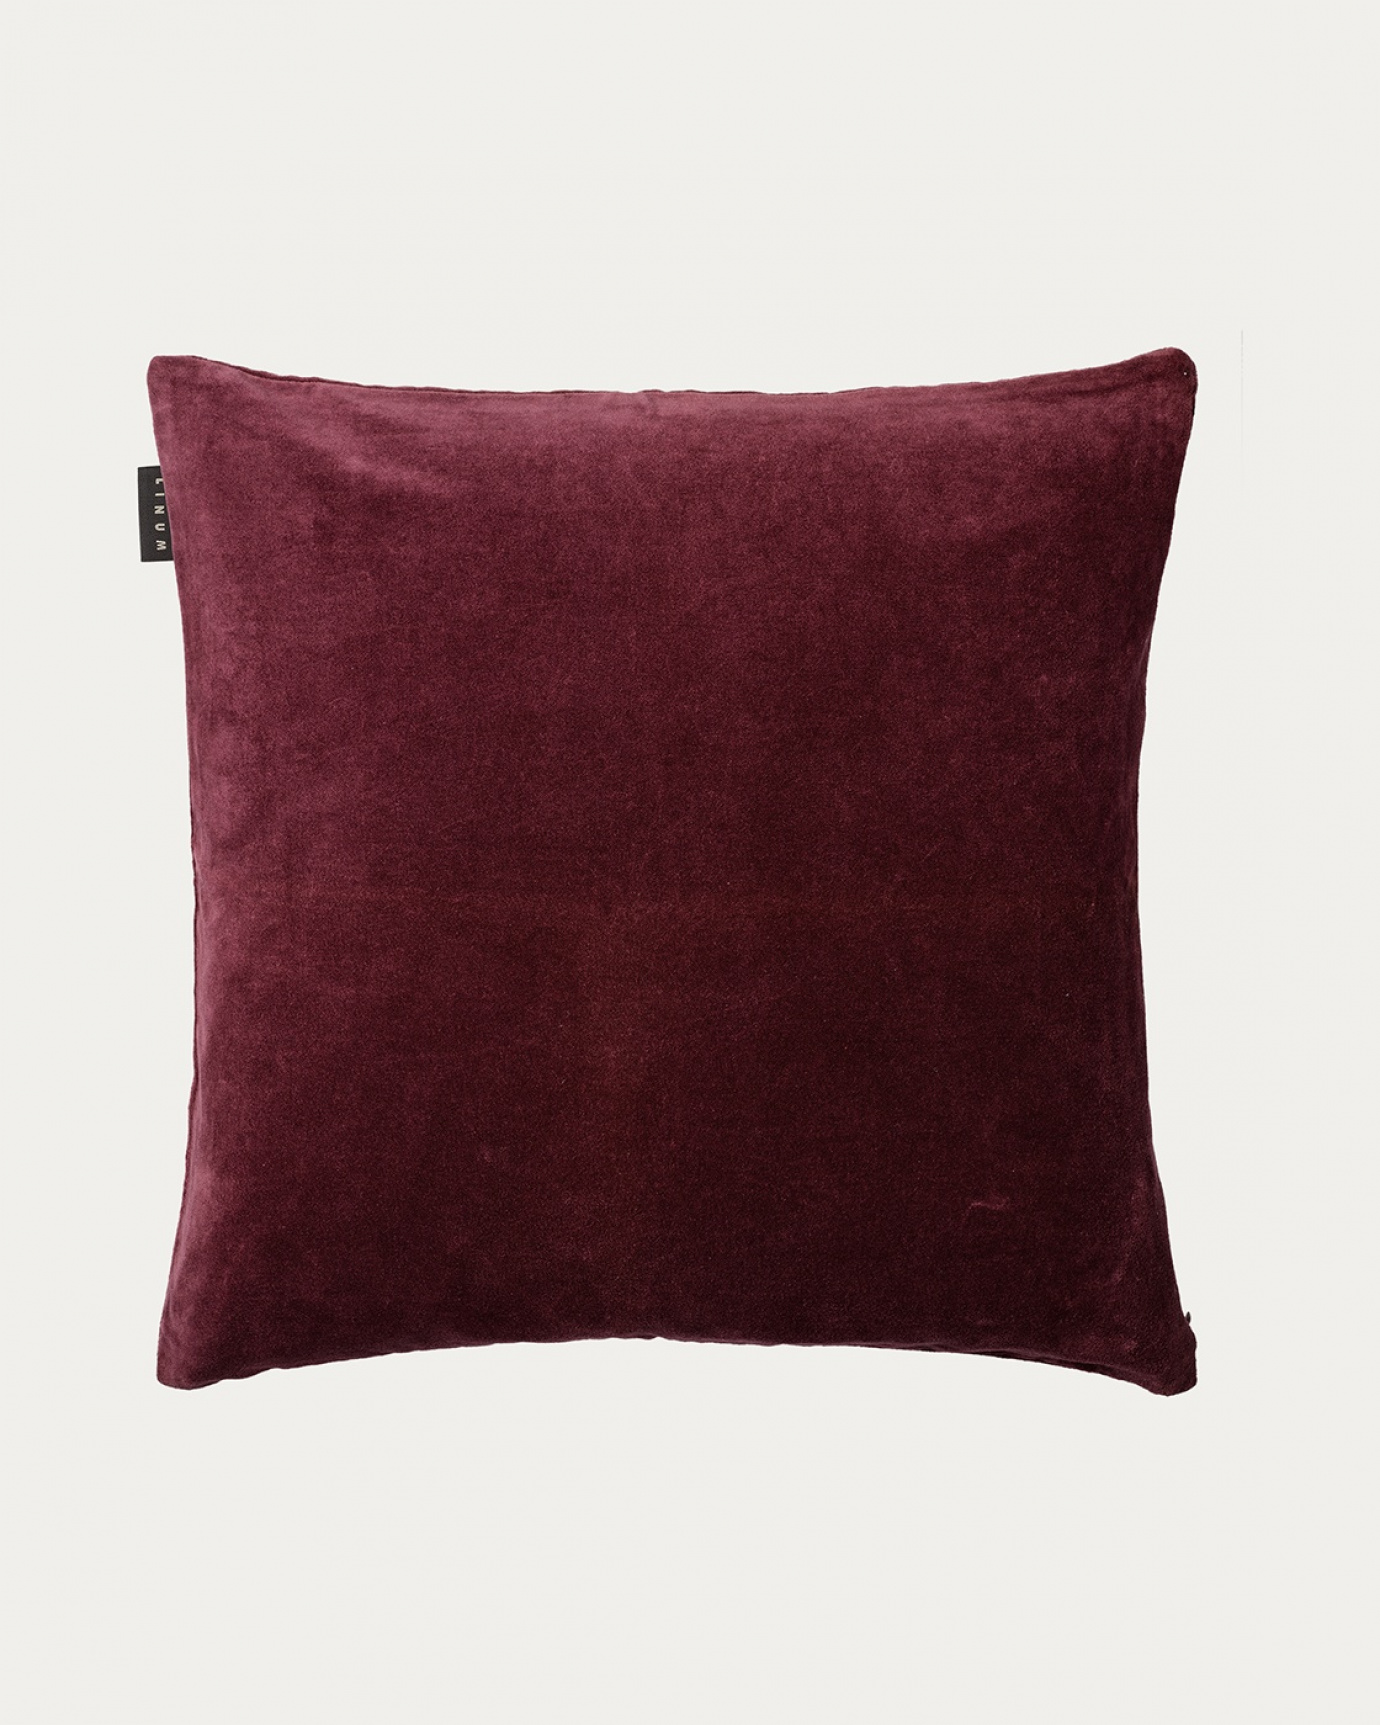 Product image dark burgundy red PAOLO cushion cover in soft cotton velvet from LINUM DESIGN. Size 50x50 cm.